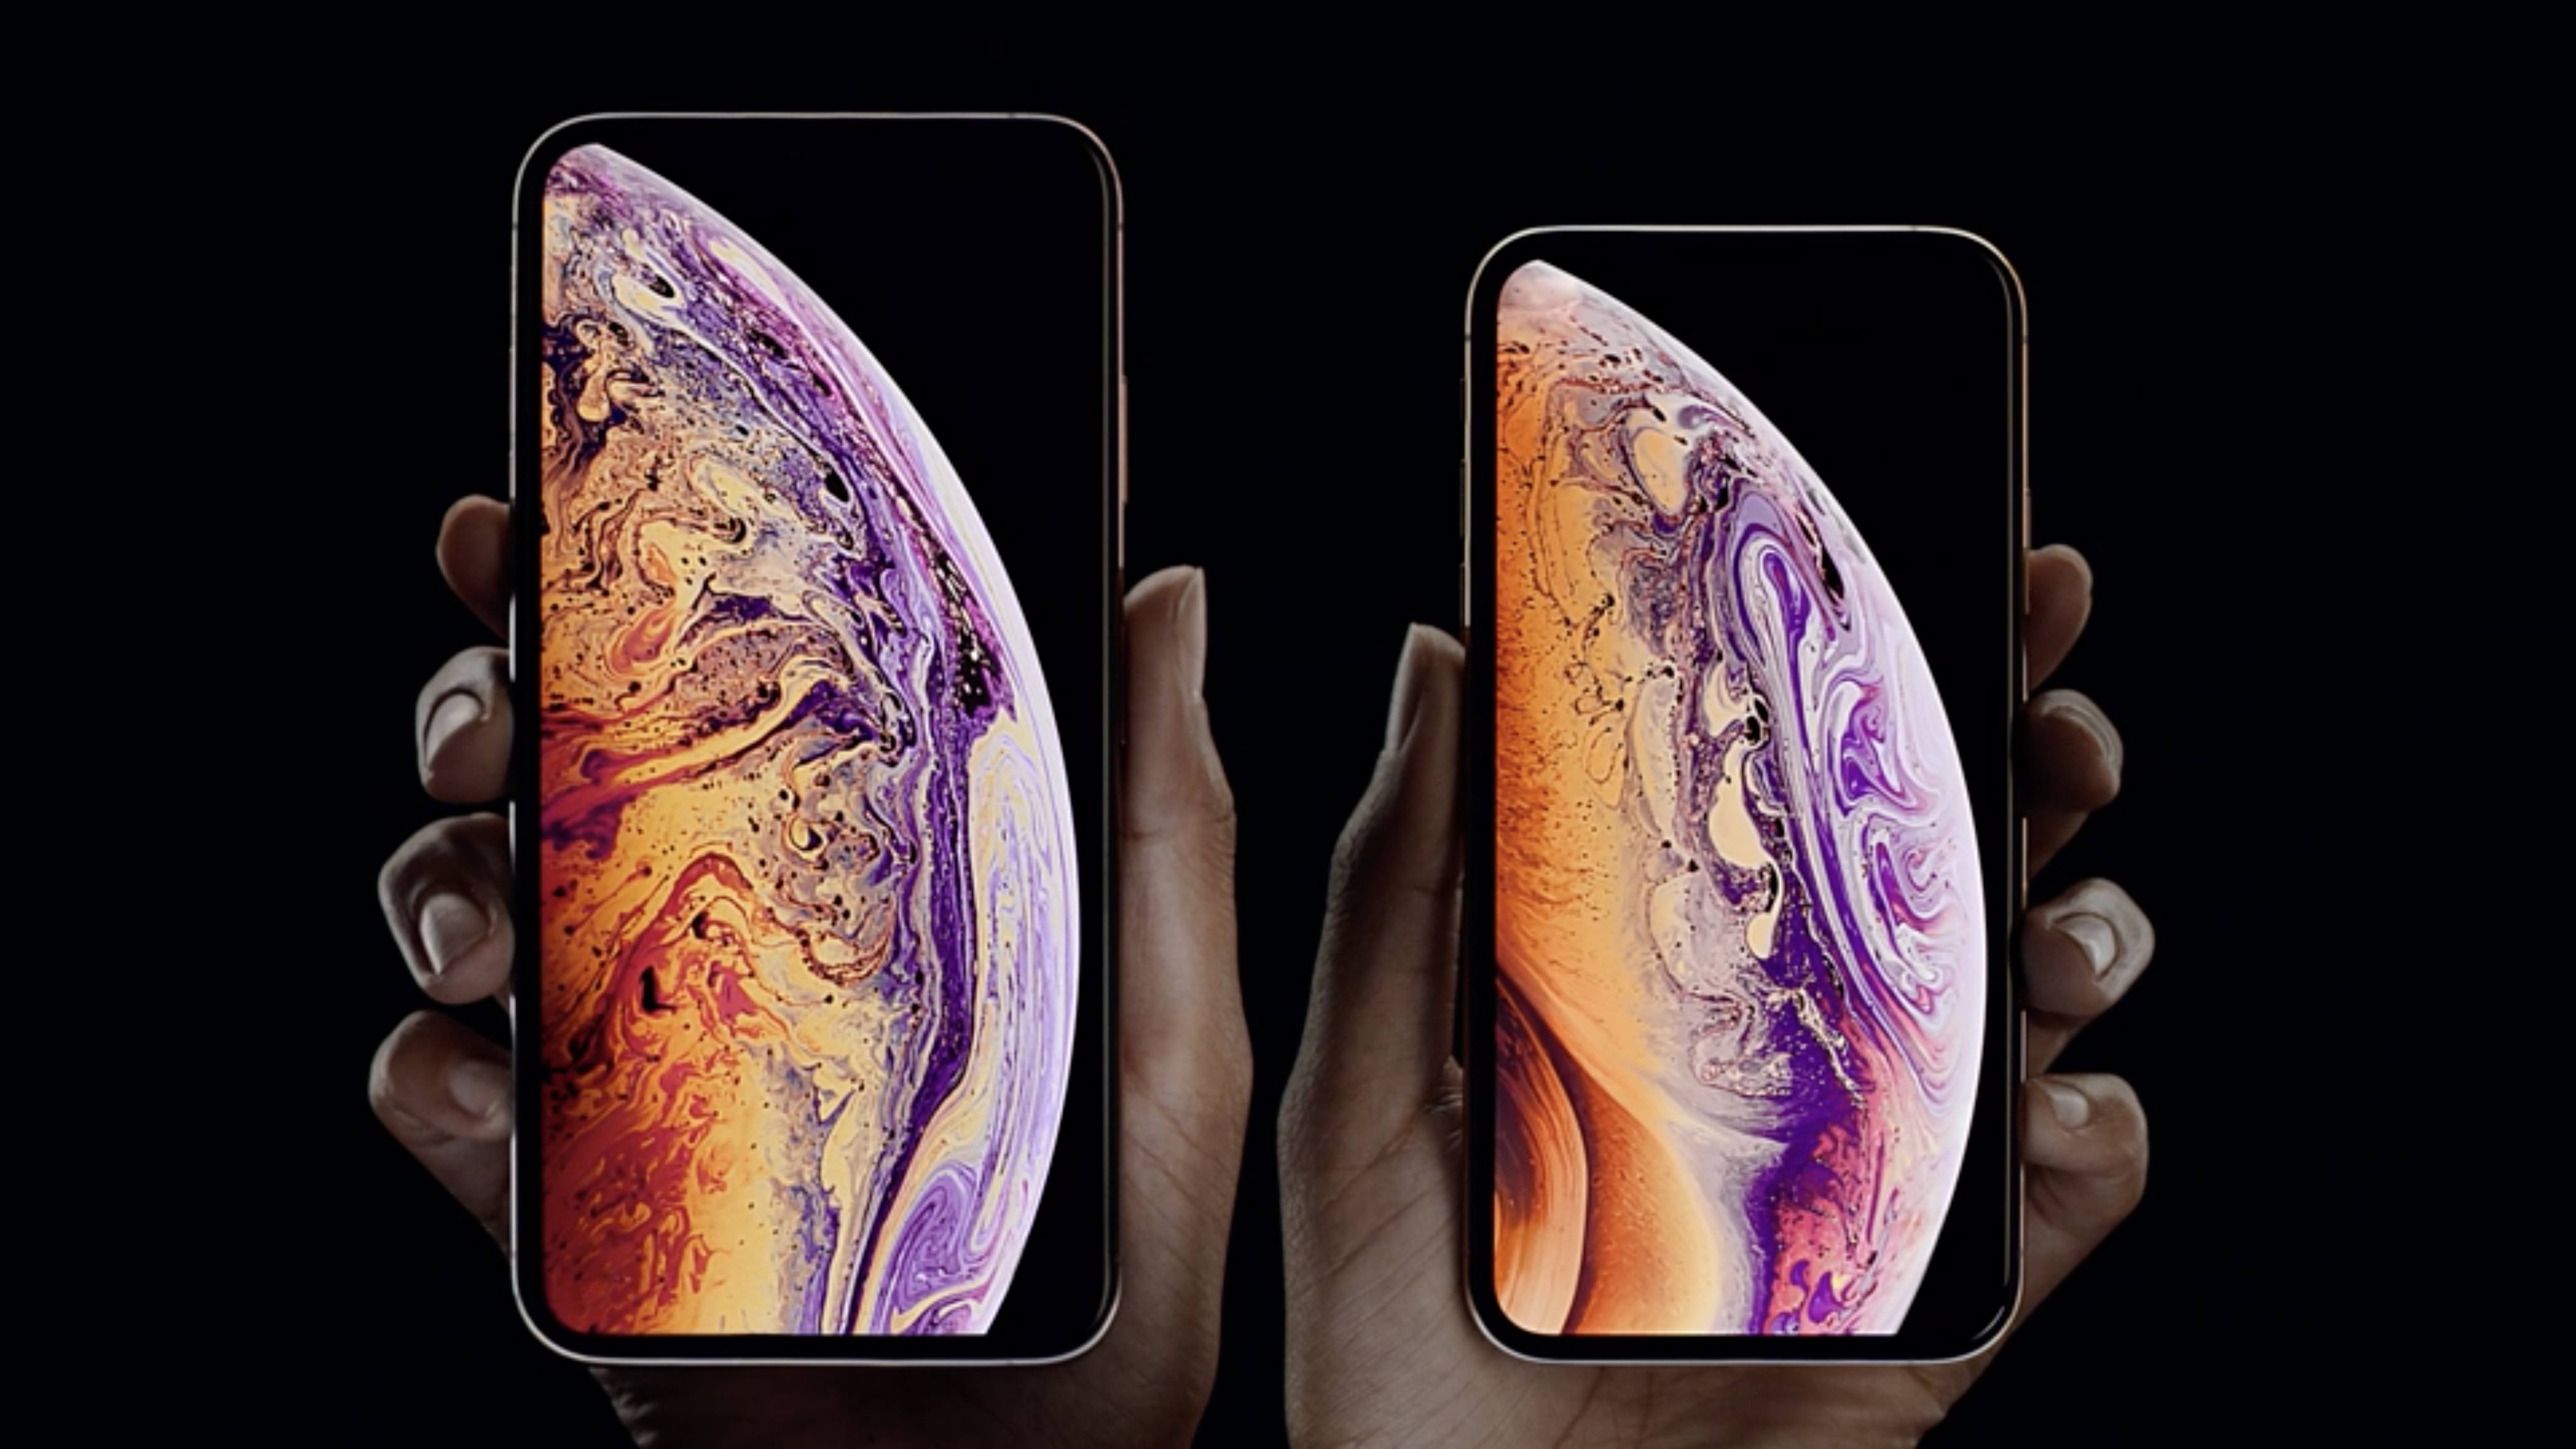 Apple suggests iPhone Xs supports faster wireless charging, but details are  unclear - 9to5Mac